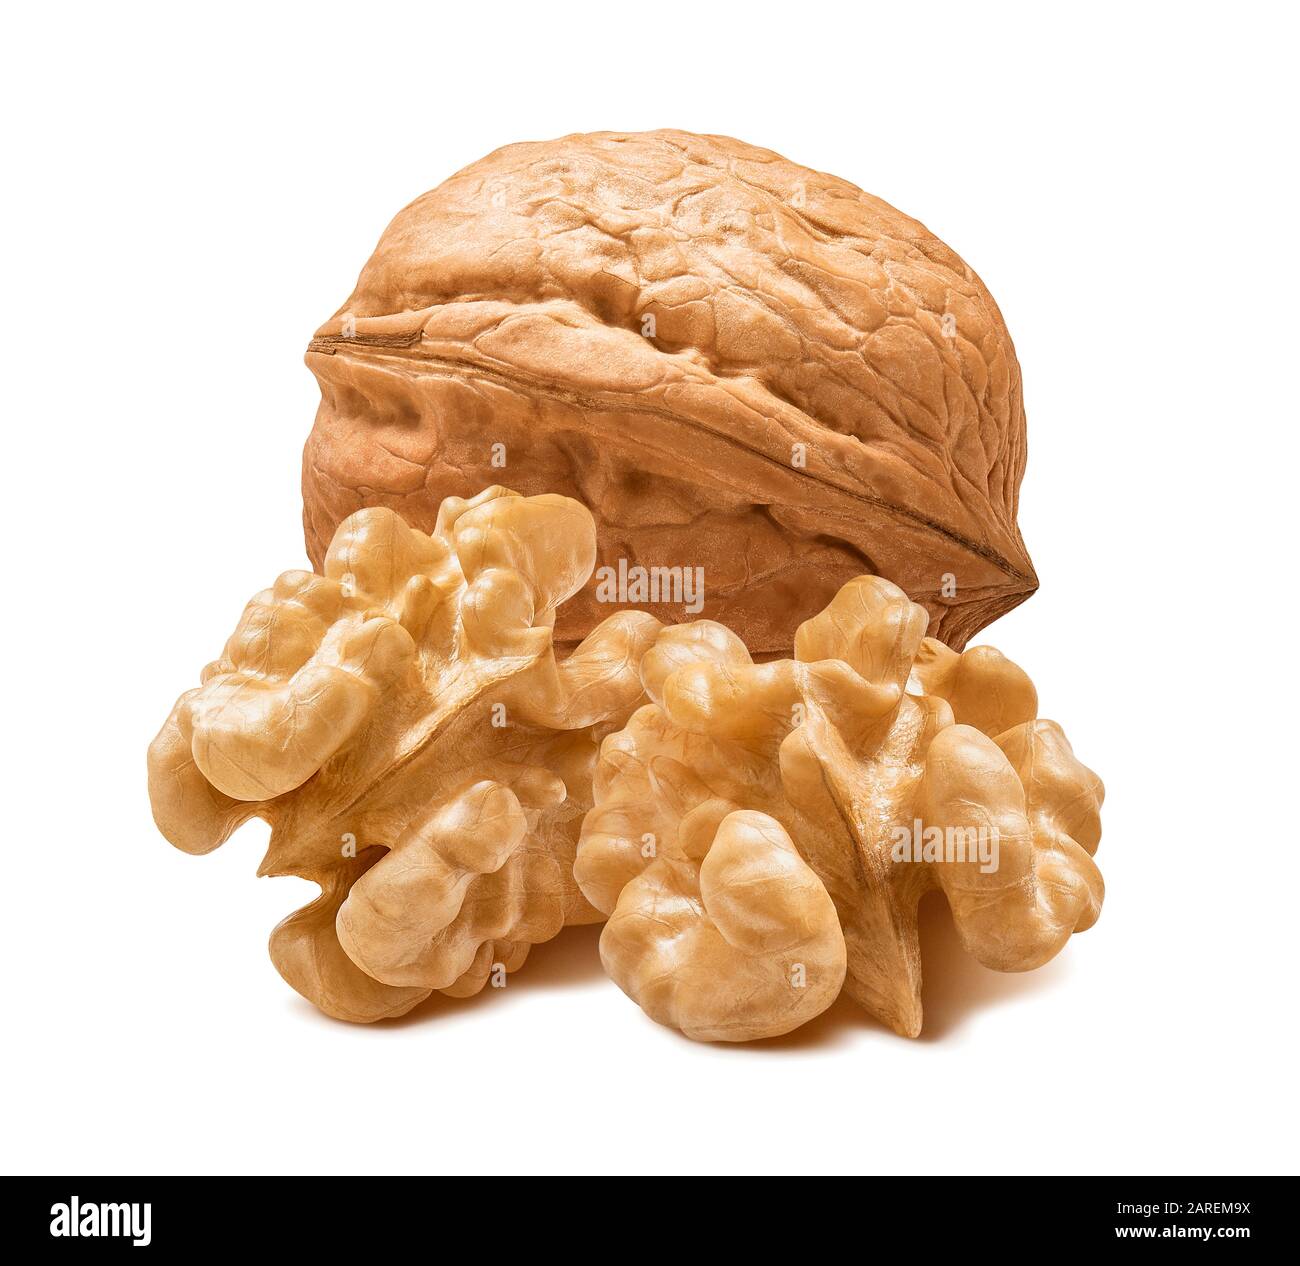 Fresh walnut nut isolated on white background. Package design element with clipping path. Stock Photo